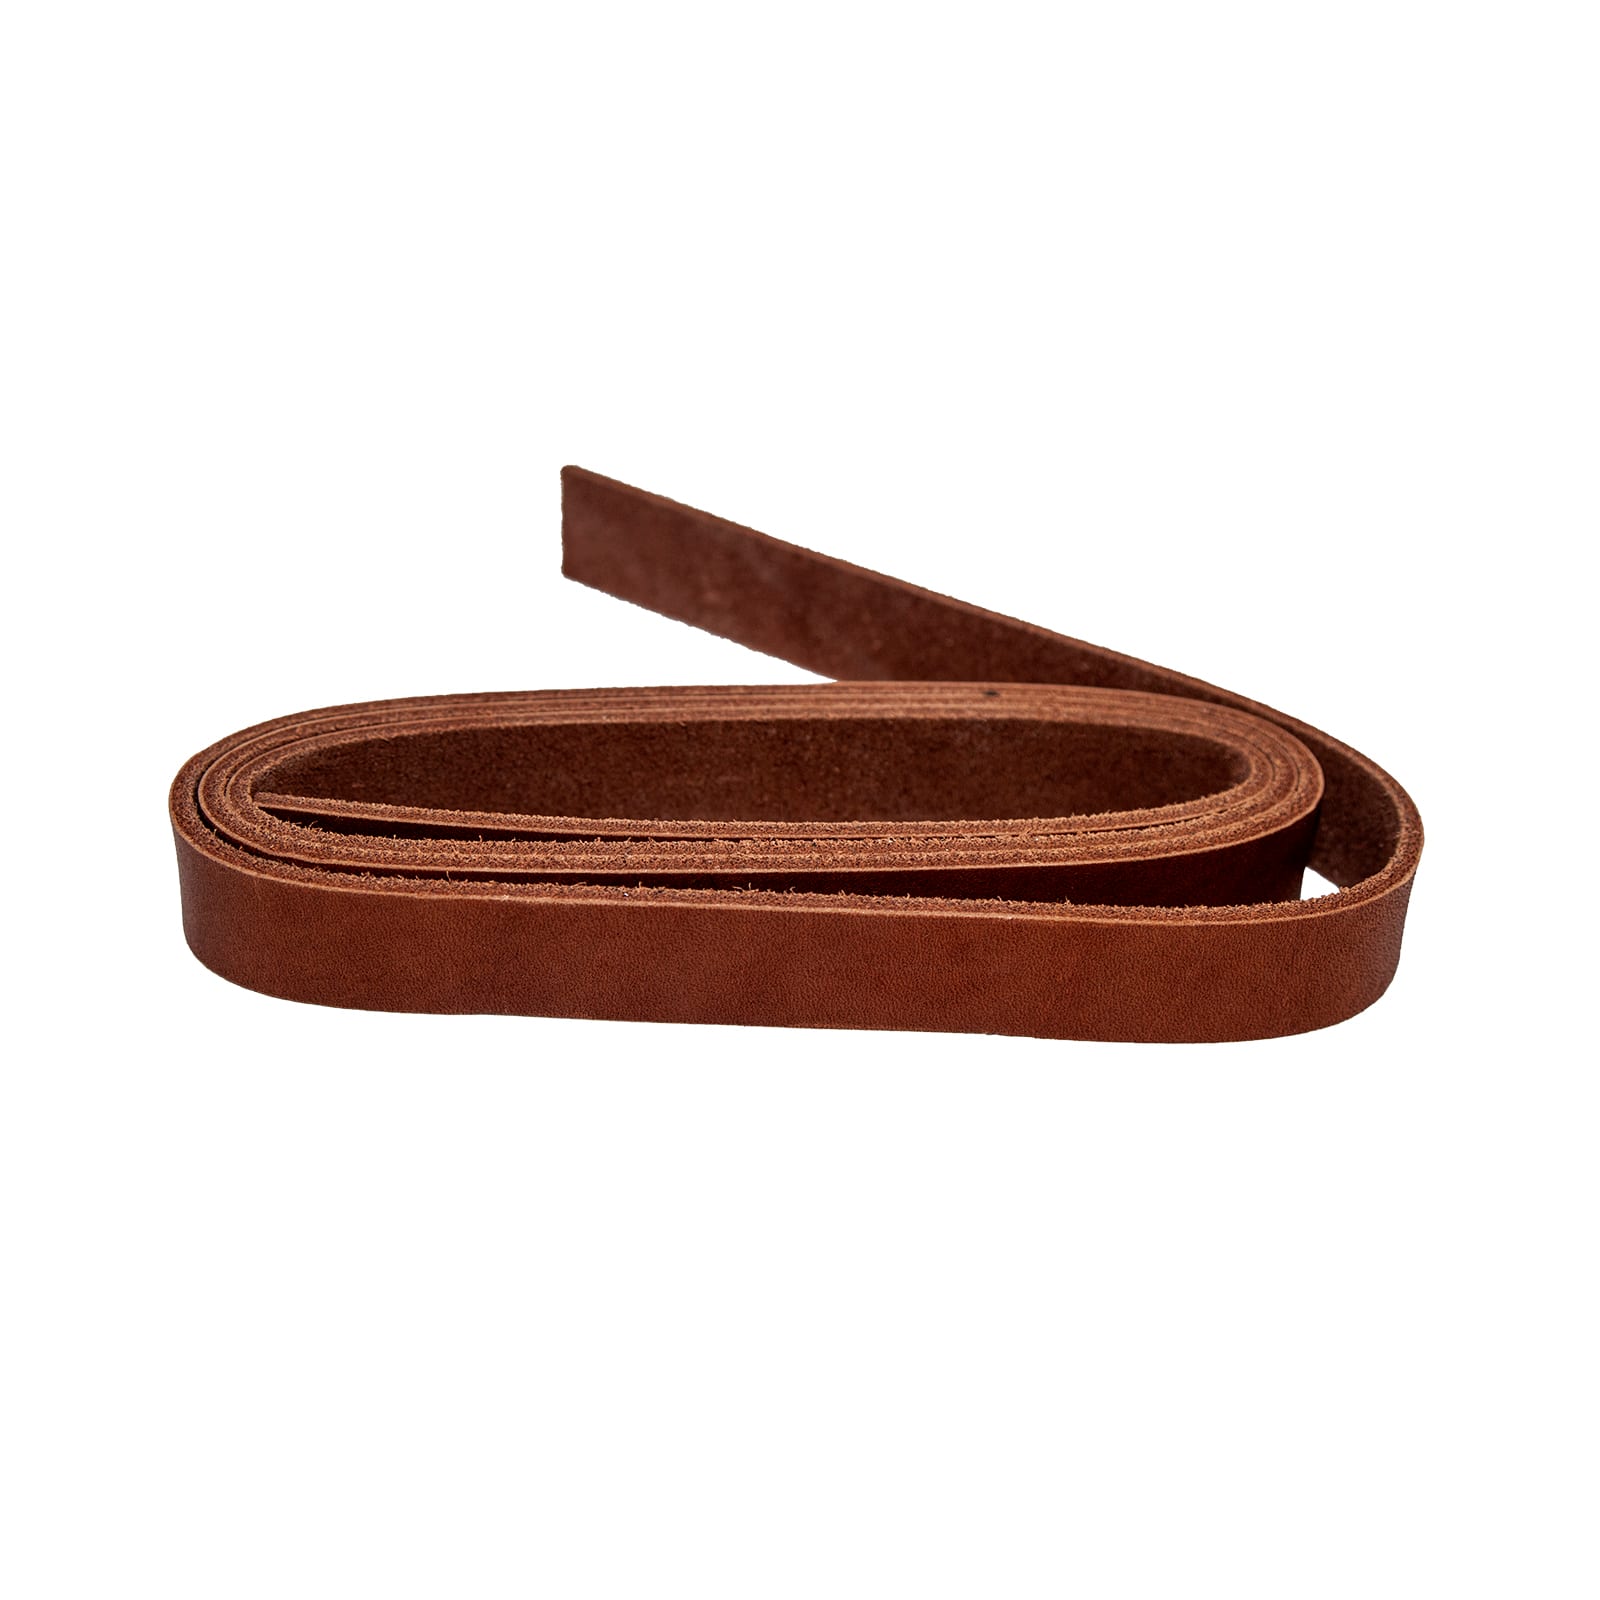 Brown Leather Strap by ArtMinds | 0.75 x 48 | Michaels